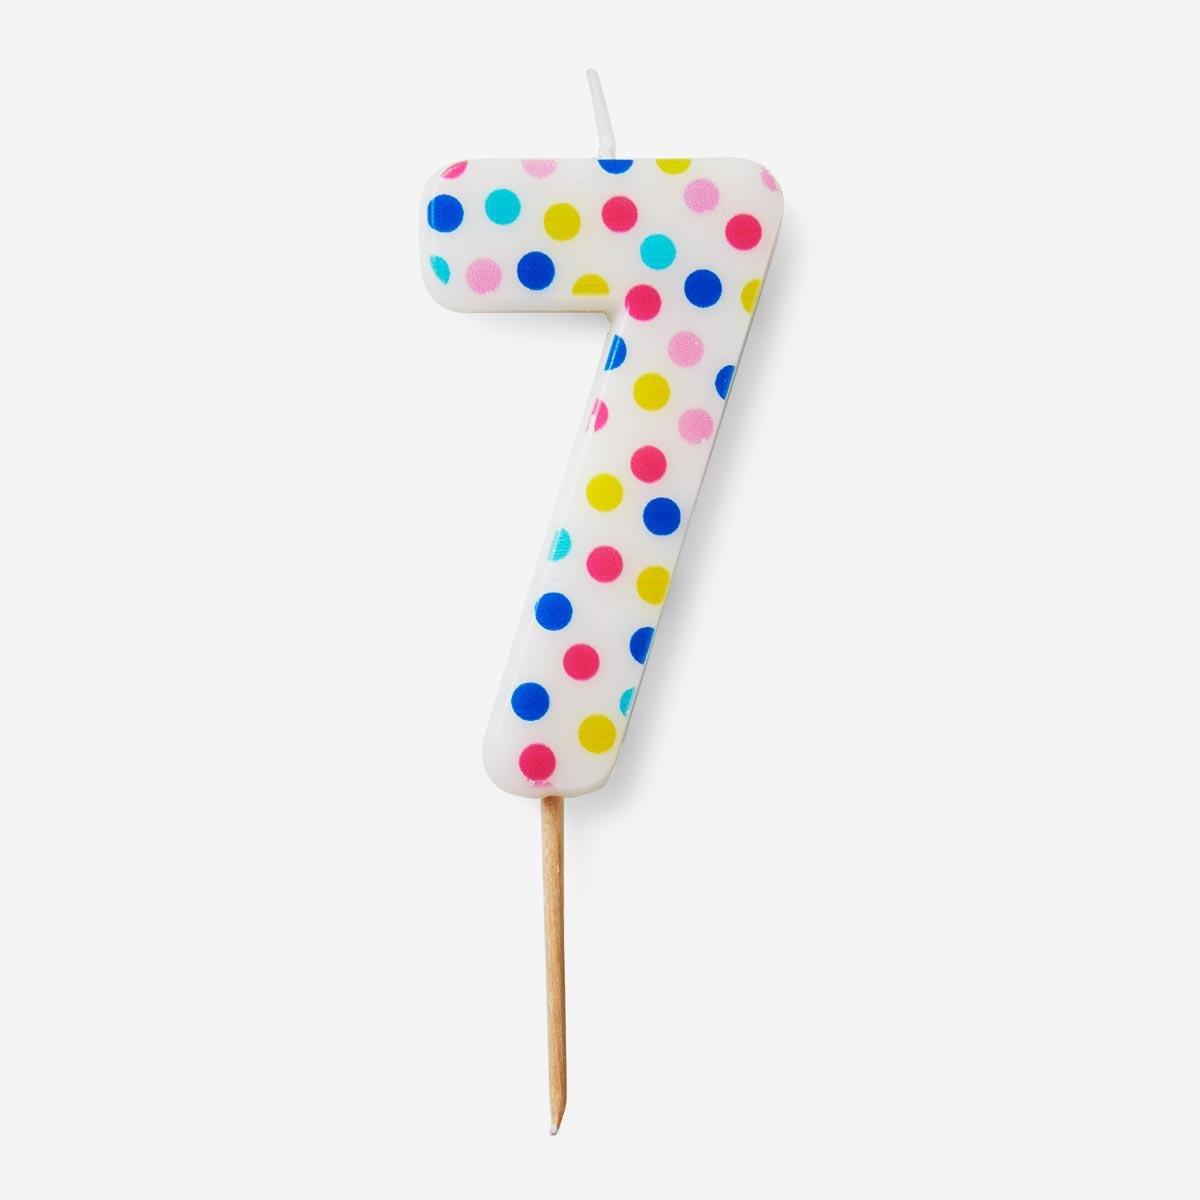 Number 7 polka dots cake candle